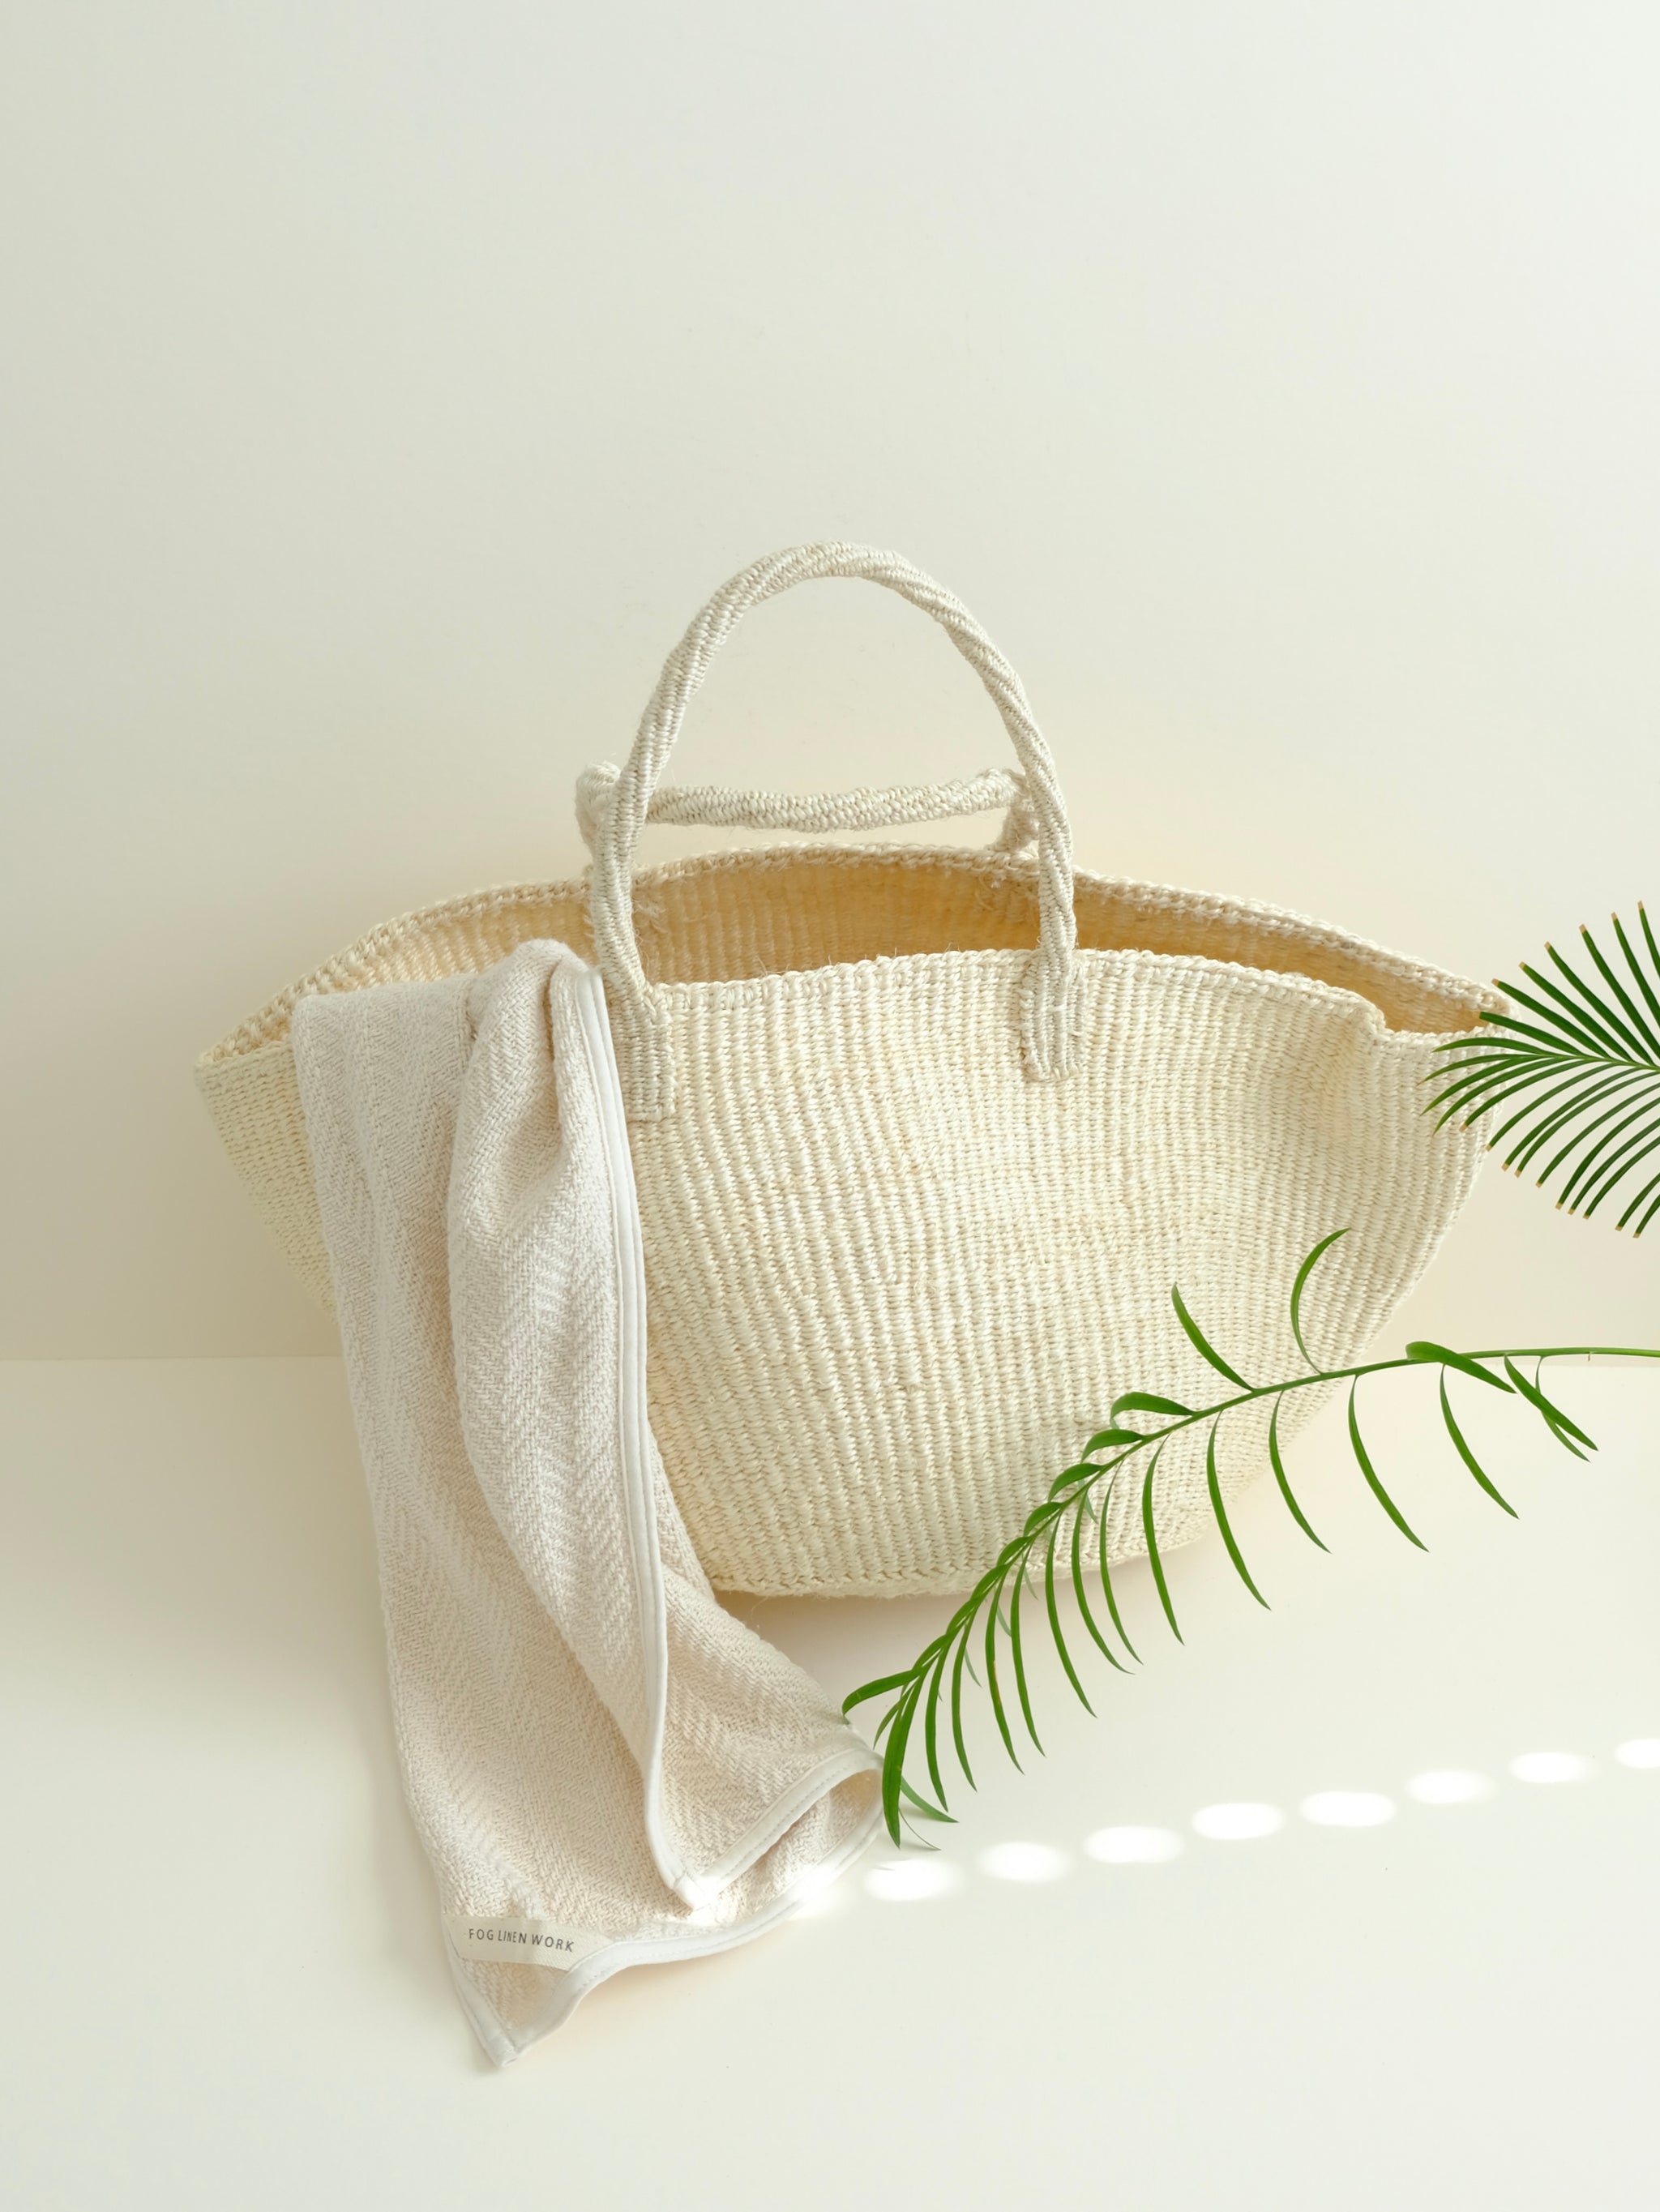 Hand Woven Sisal Tote Bag in Natural Color - Africabaie.com